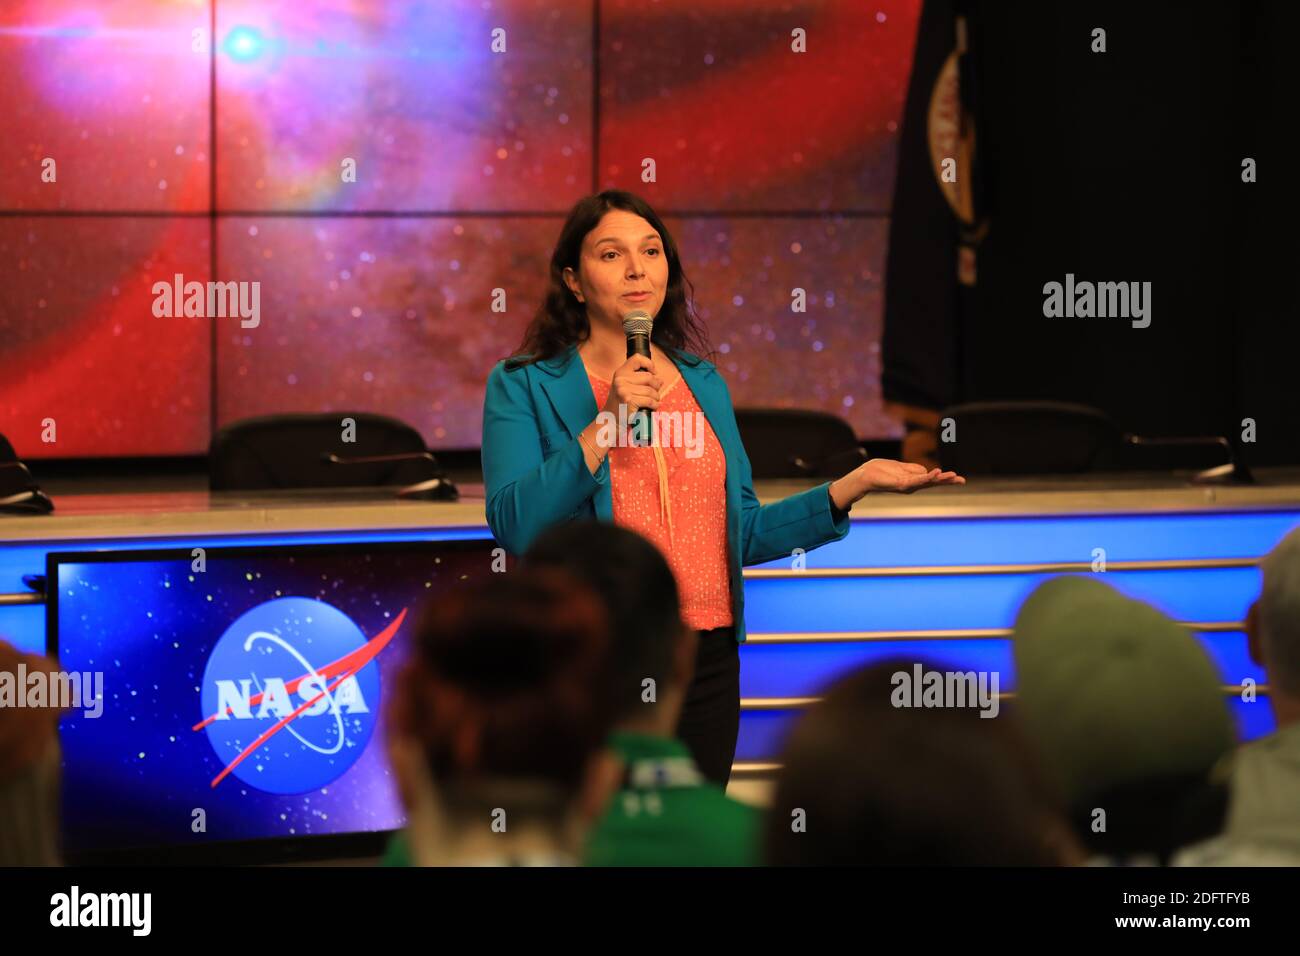 NASA Goddard Space Flight Center Scientist Elisa Quintana speaks during the pre-launch mission briefing for the NASA Transitioning Exoplanet Survey Satellite (TESS) launch at the Kennedy Space Center Press Site Auditorium April 15, 2018 in Cape Canaveral, Florida. Stock Photo